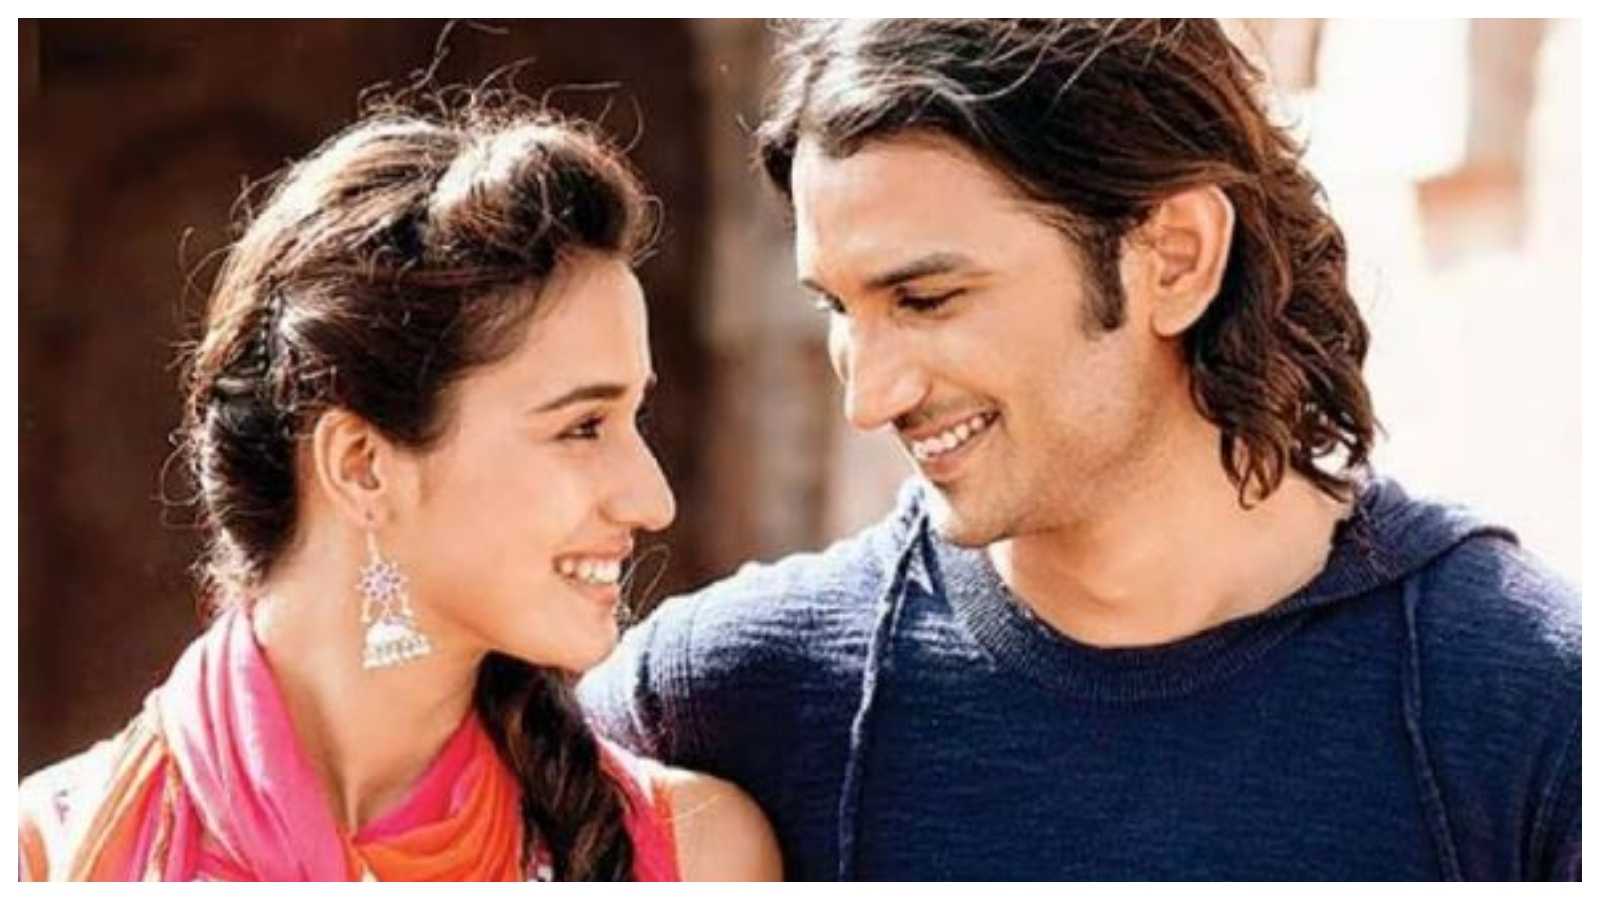 Disha Patani shares a special message for late Sushant Singh Rajput as MS Dhoni: The Untold Story clocks 7 years